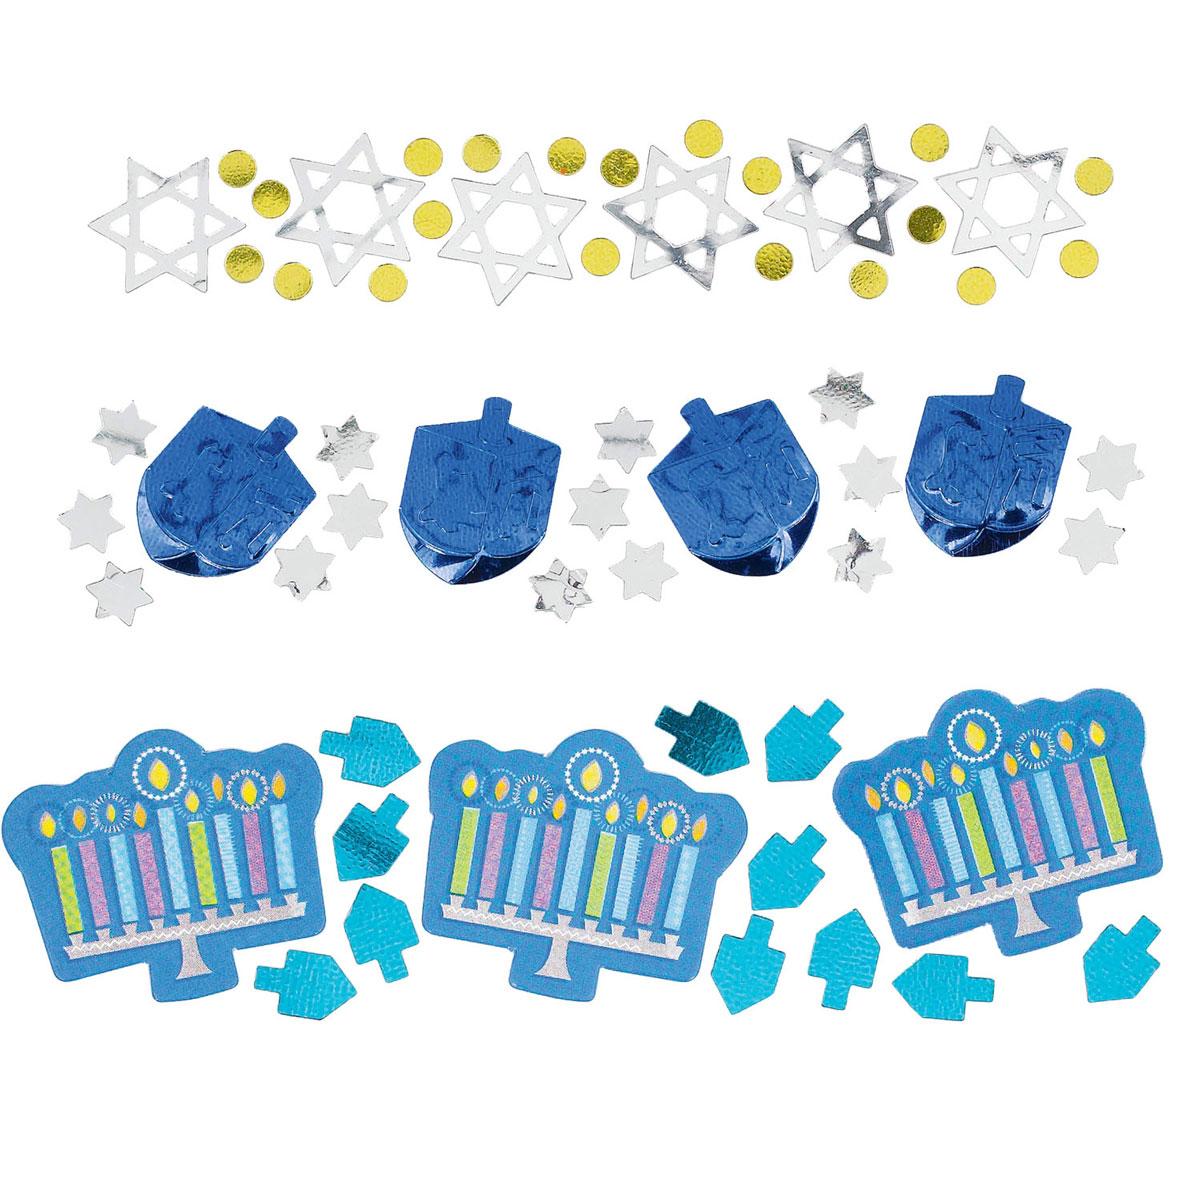 Hanukkah Celebrations 3 Pack Confetti - 34g by Amscan 360518 available here at Karnival Ciostumes online party shop